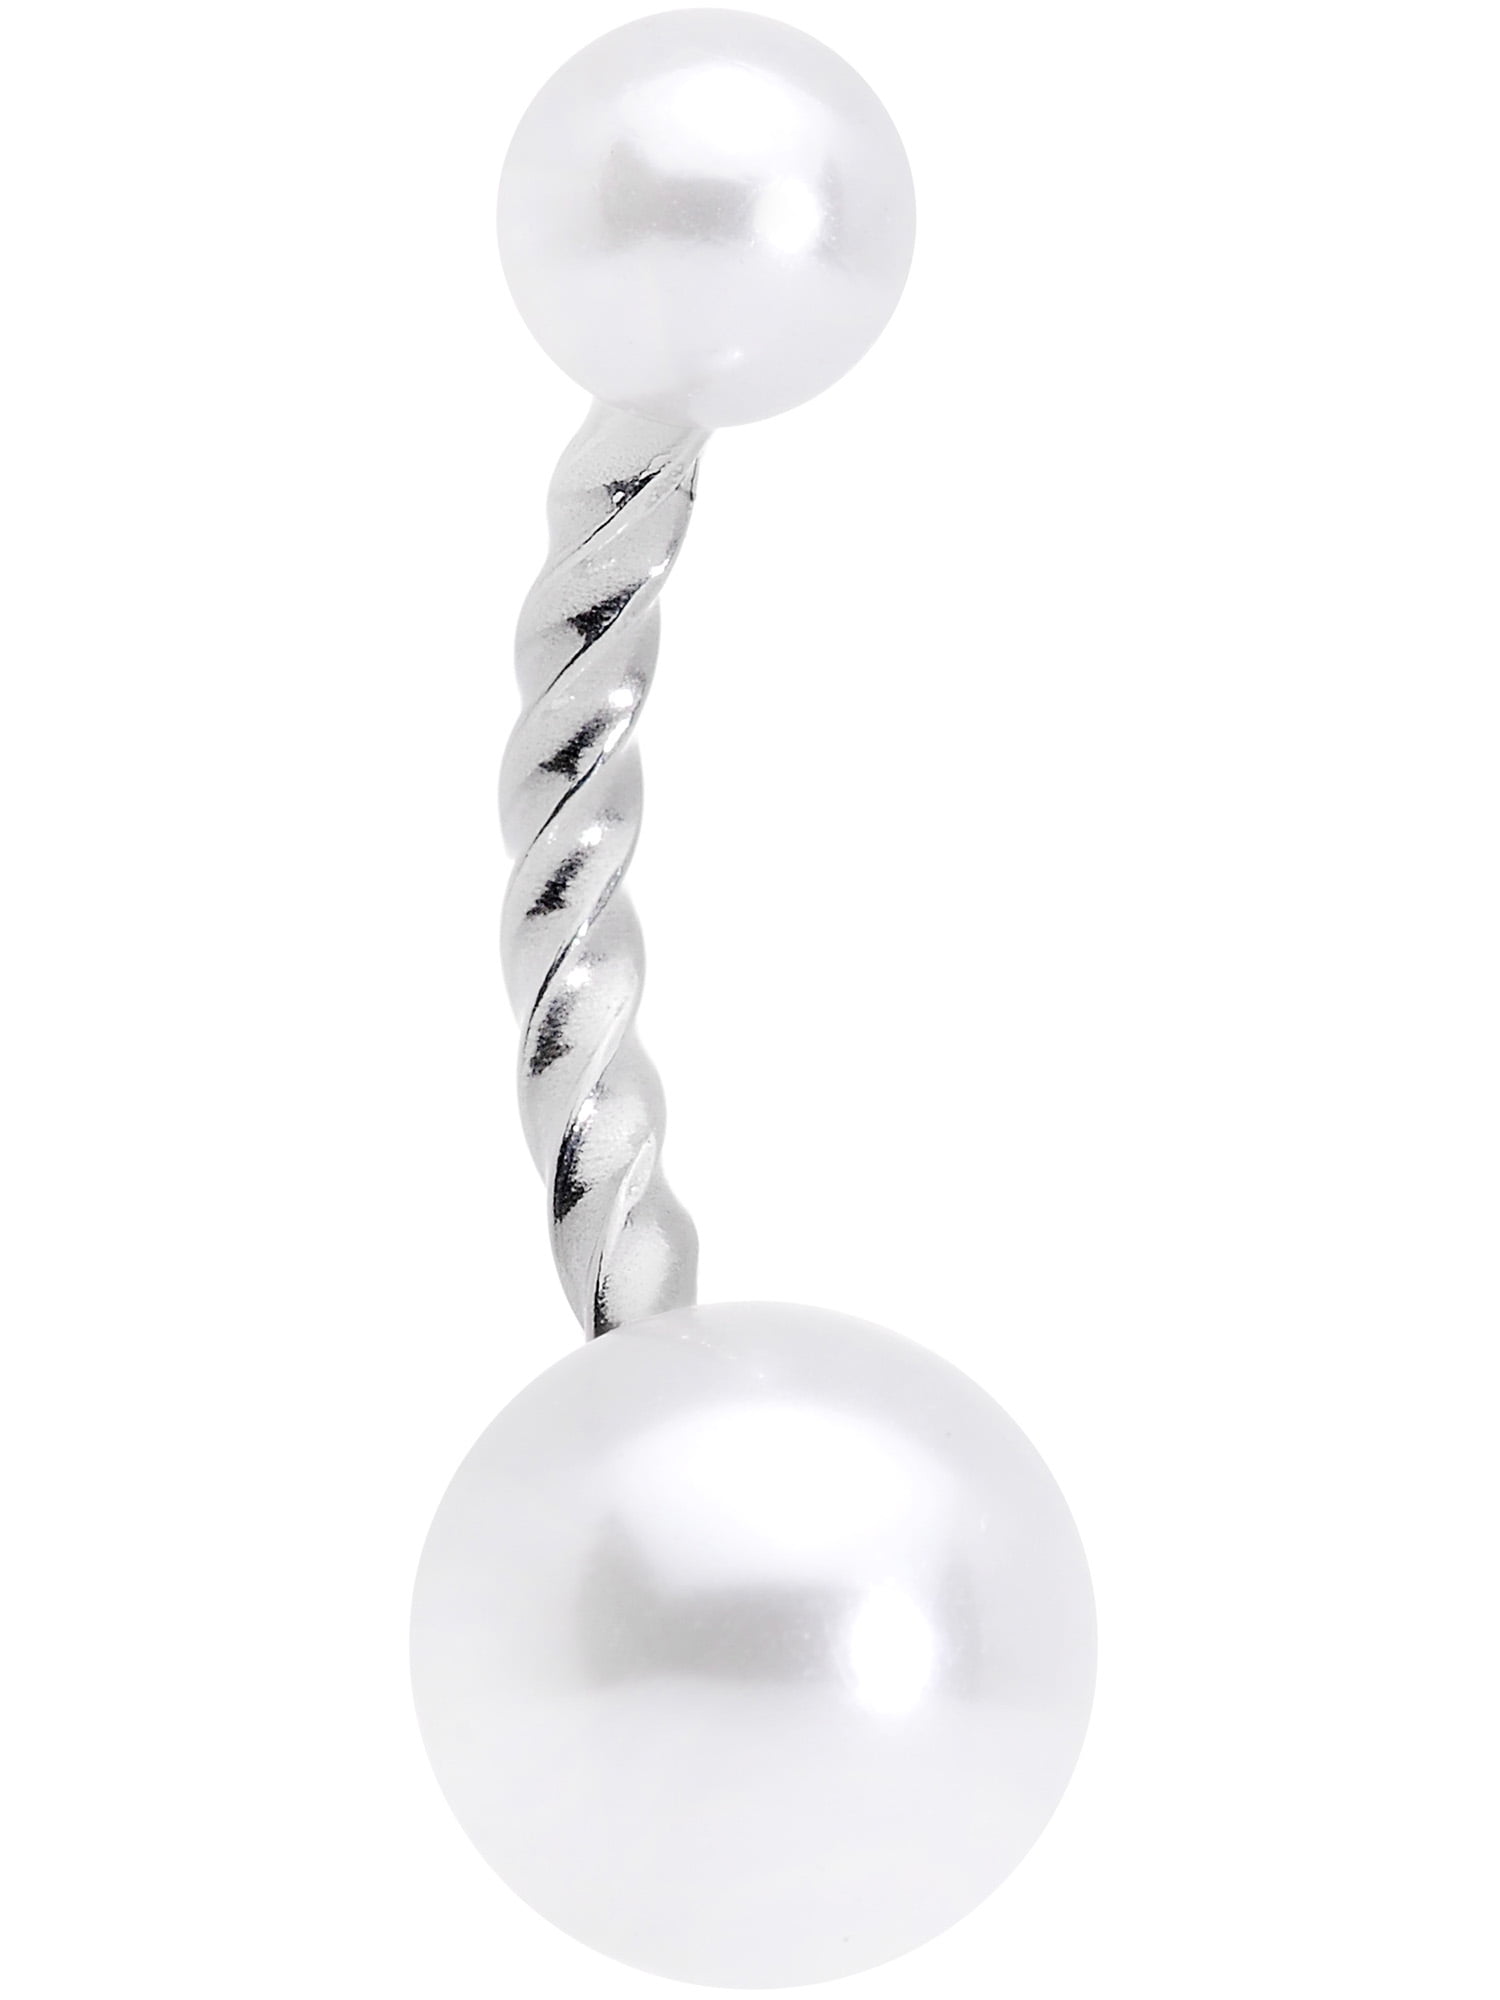 Single 14g Spiral Twister With Acrylic Ball Belly Button Ring Naval Piercing 